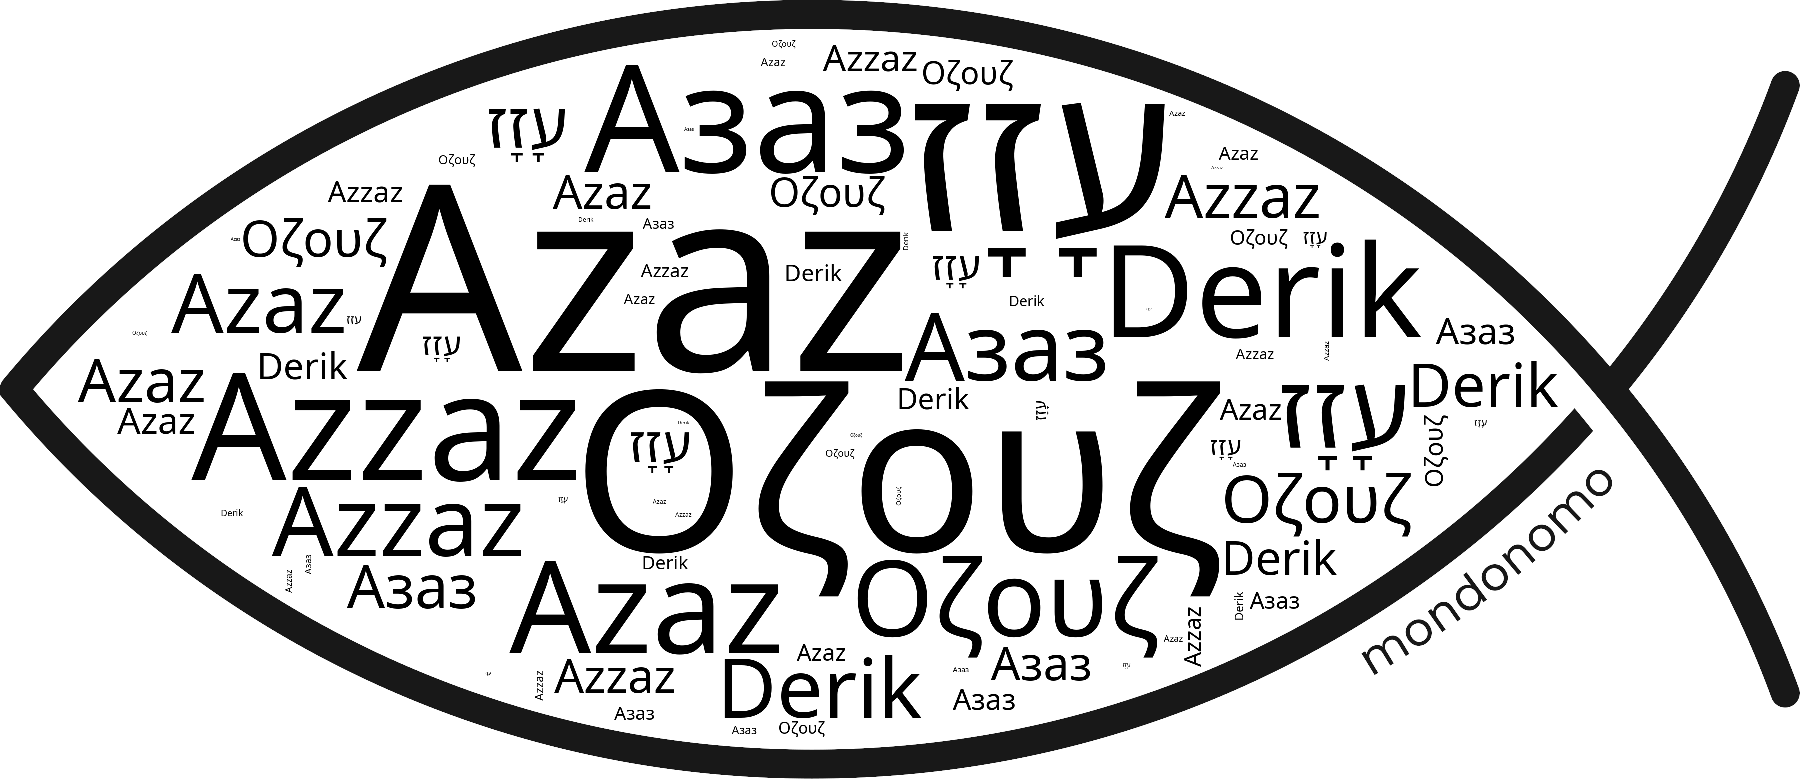 Name Azaz in the world's Bibles